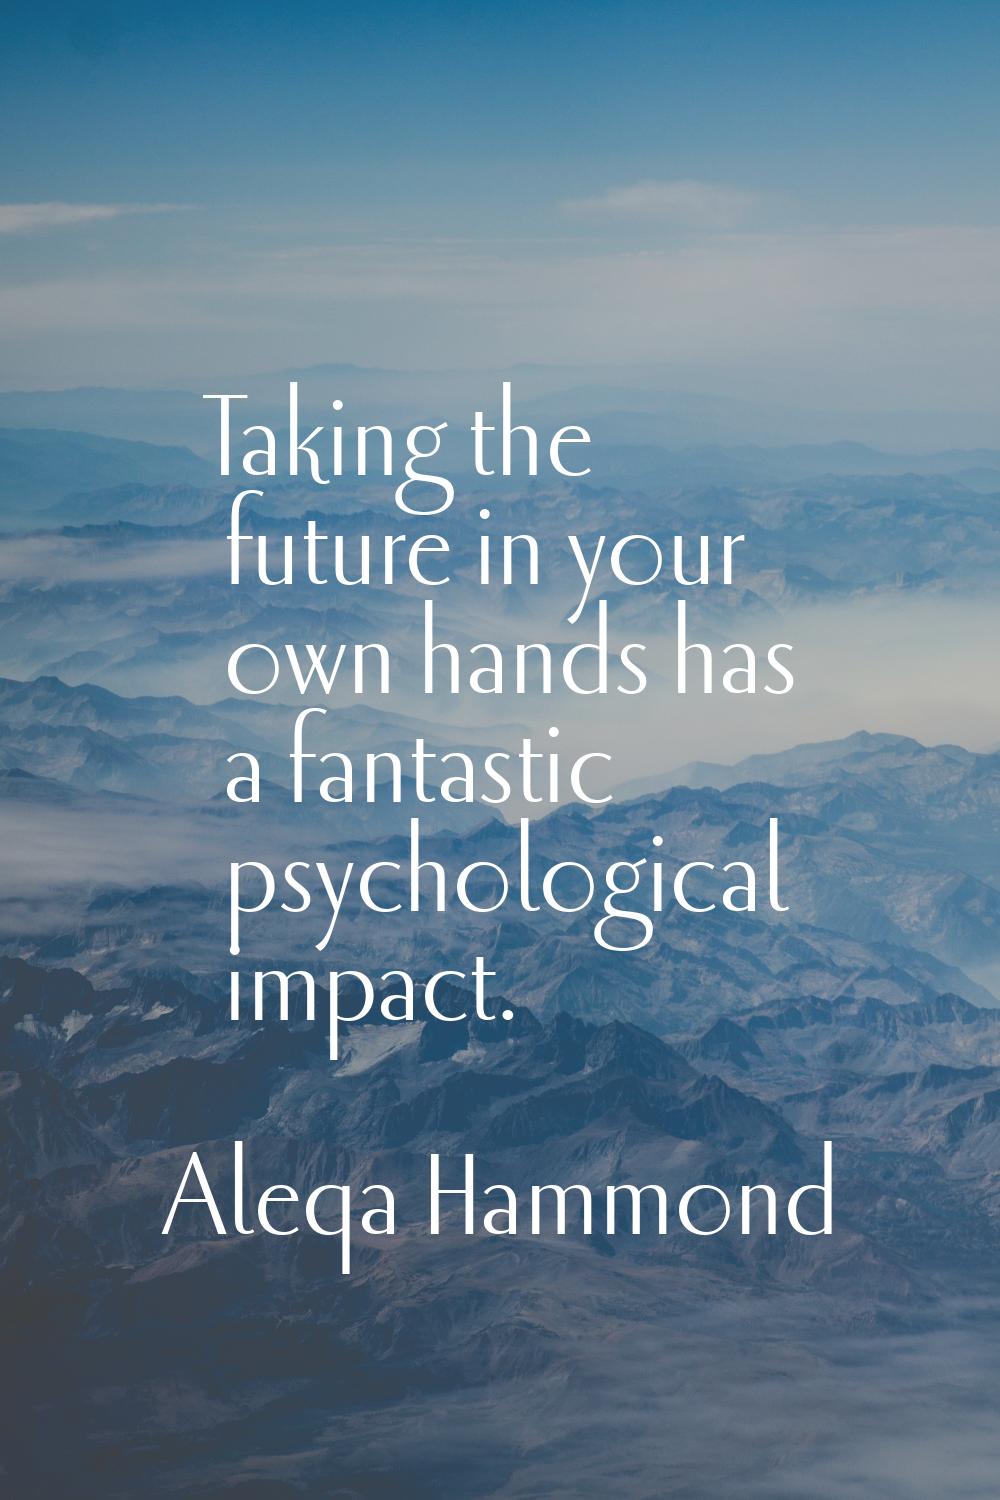 Taking the future in your own hands has a fantastic psychological impact.